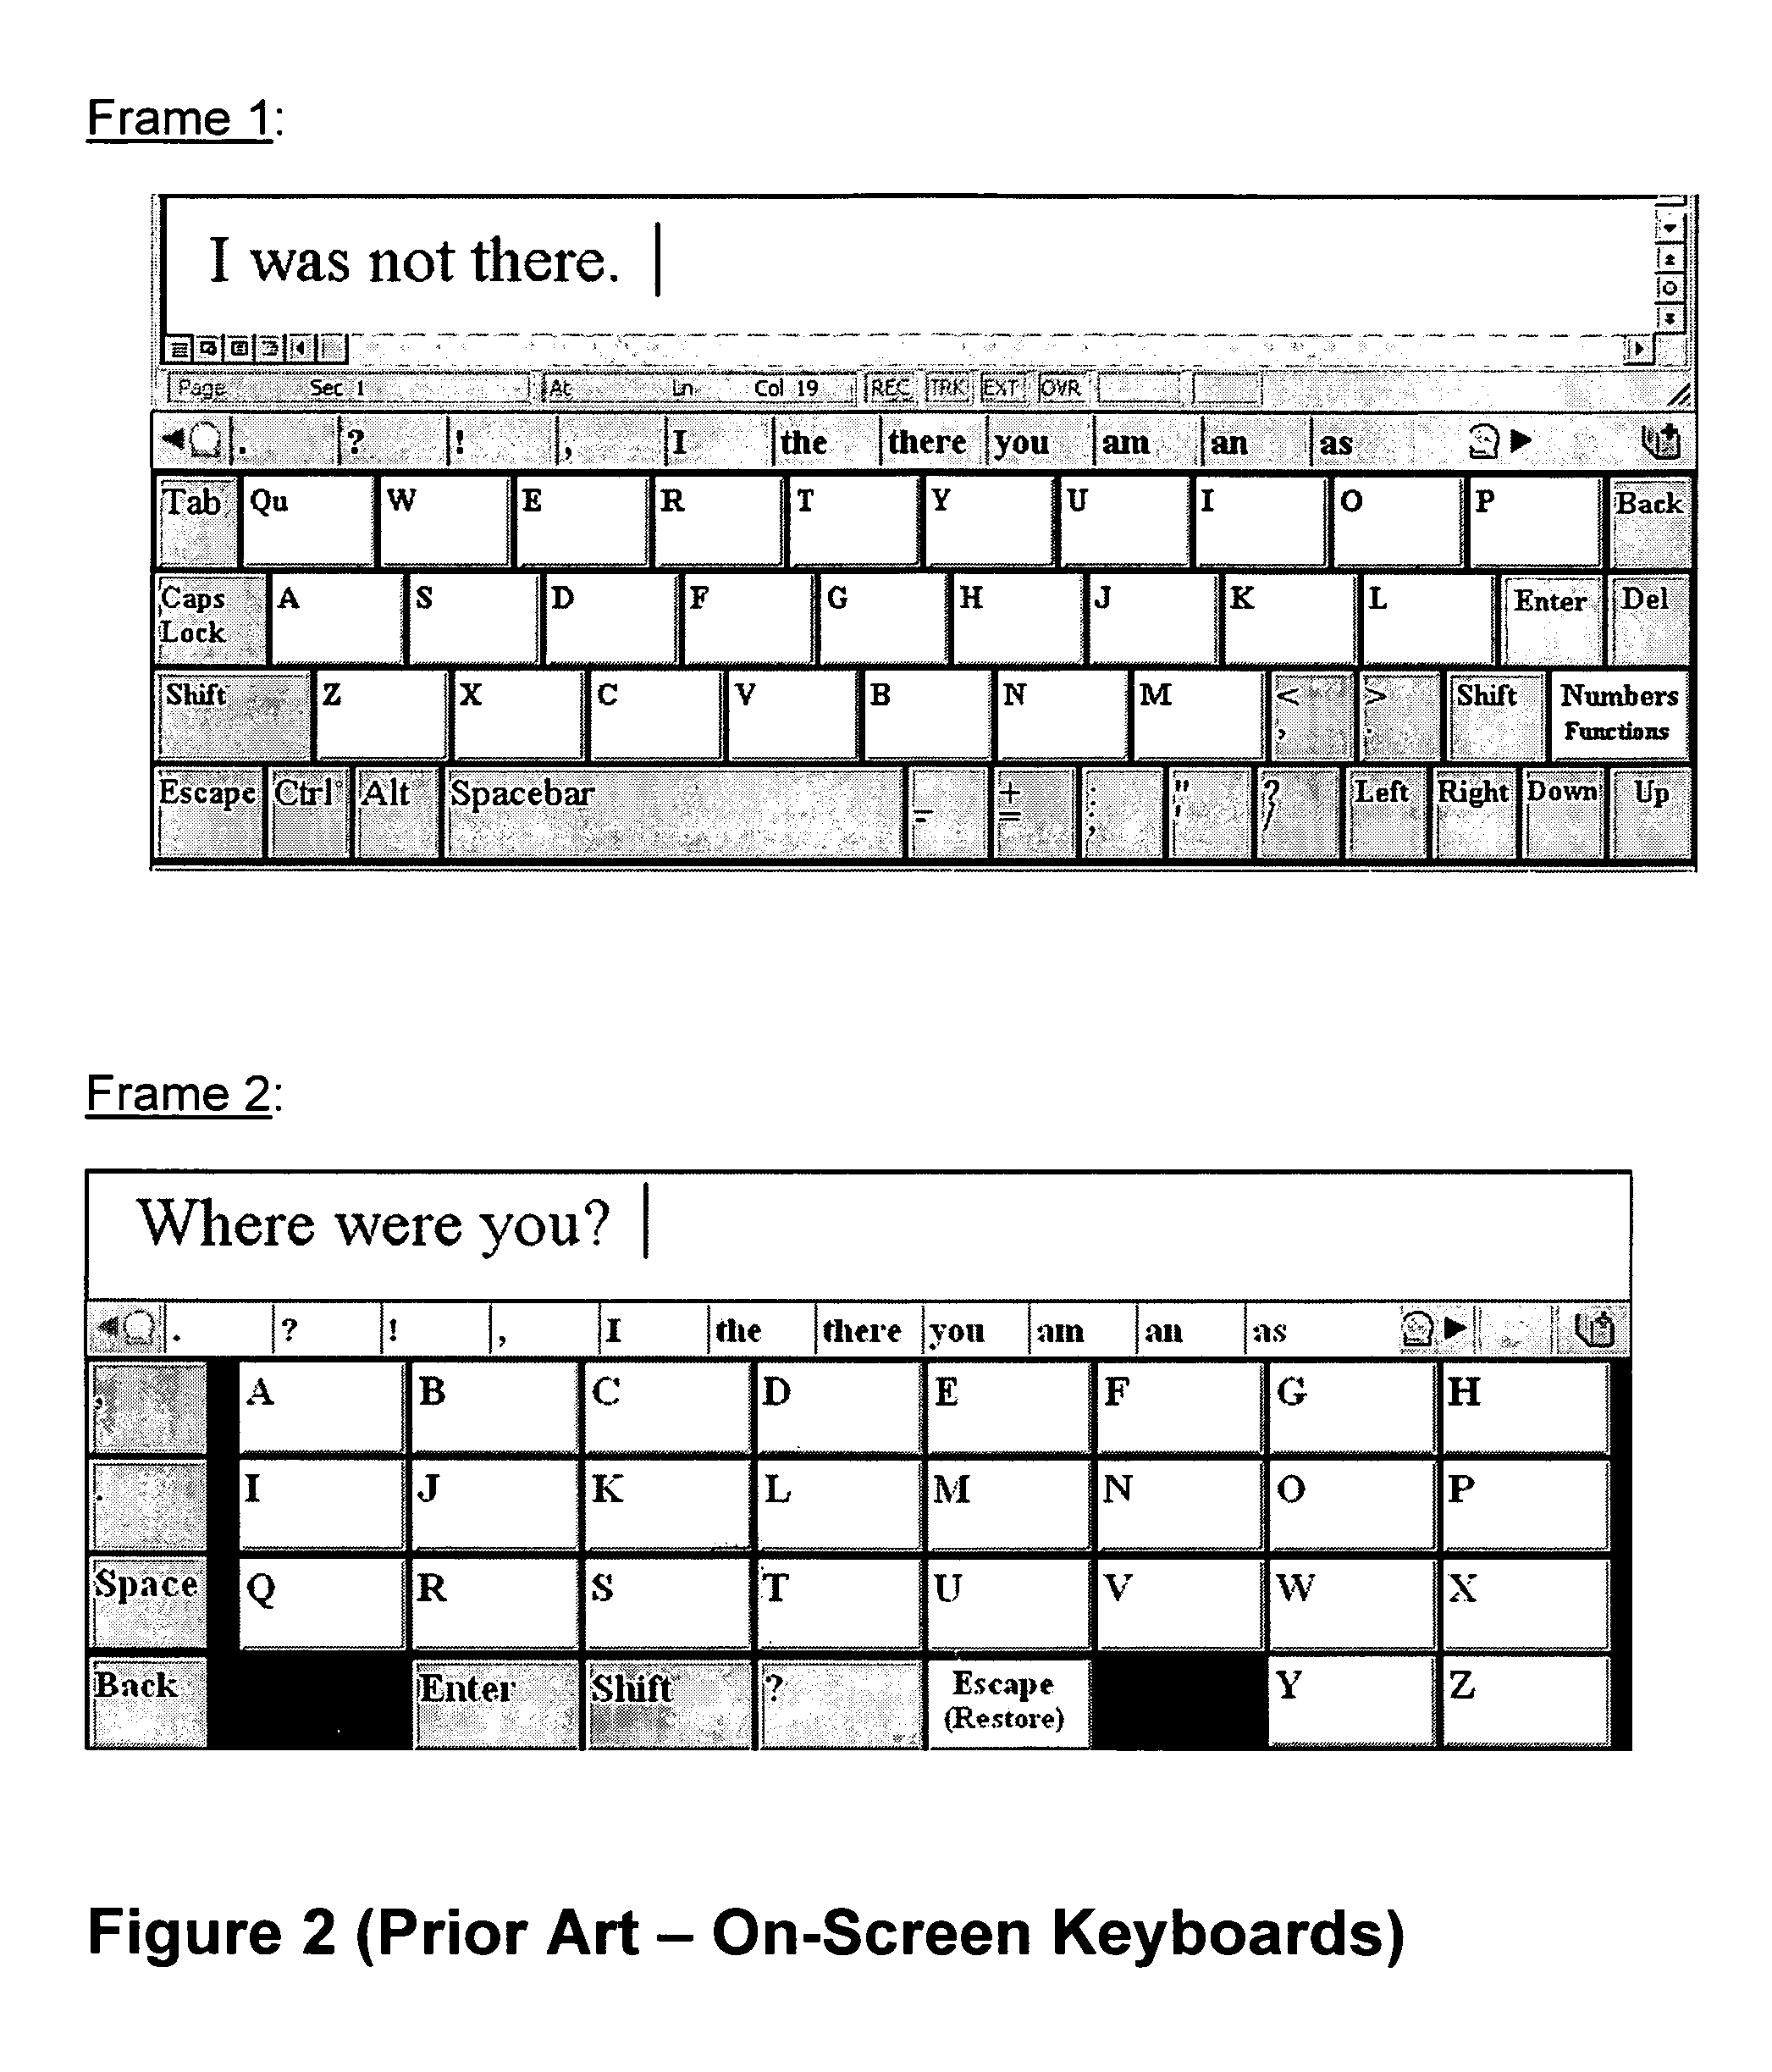 Process and apparatus for providing a one-dimensional computer input interface allowing movement in one or two directions to conduct pointer operations usually performed with a mouse and character input usually performed with a keyboard